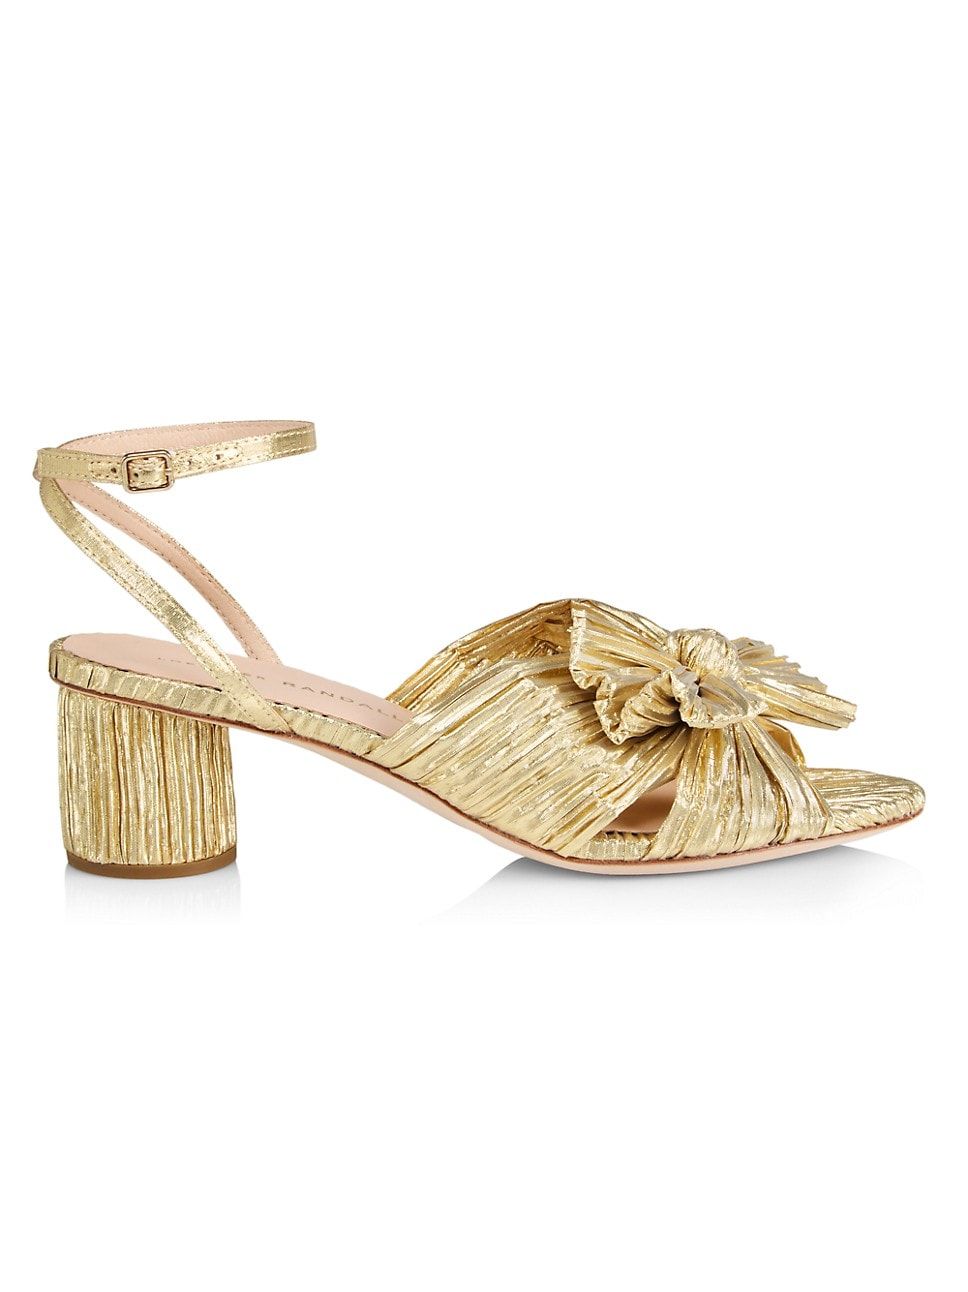 Dahlia Knotted Sandals | Saks Fifth Avenue